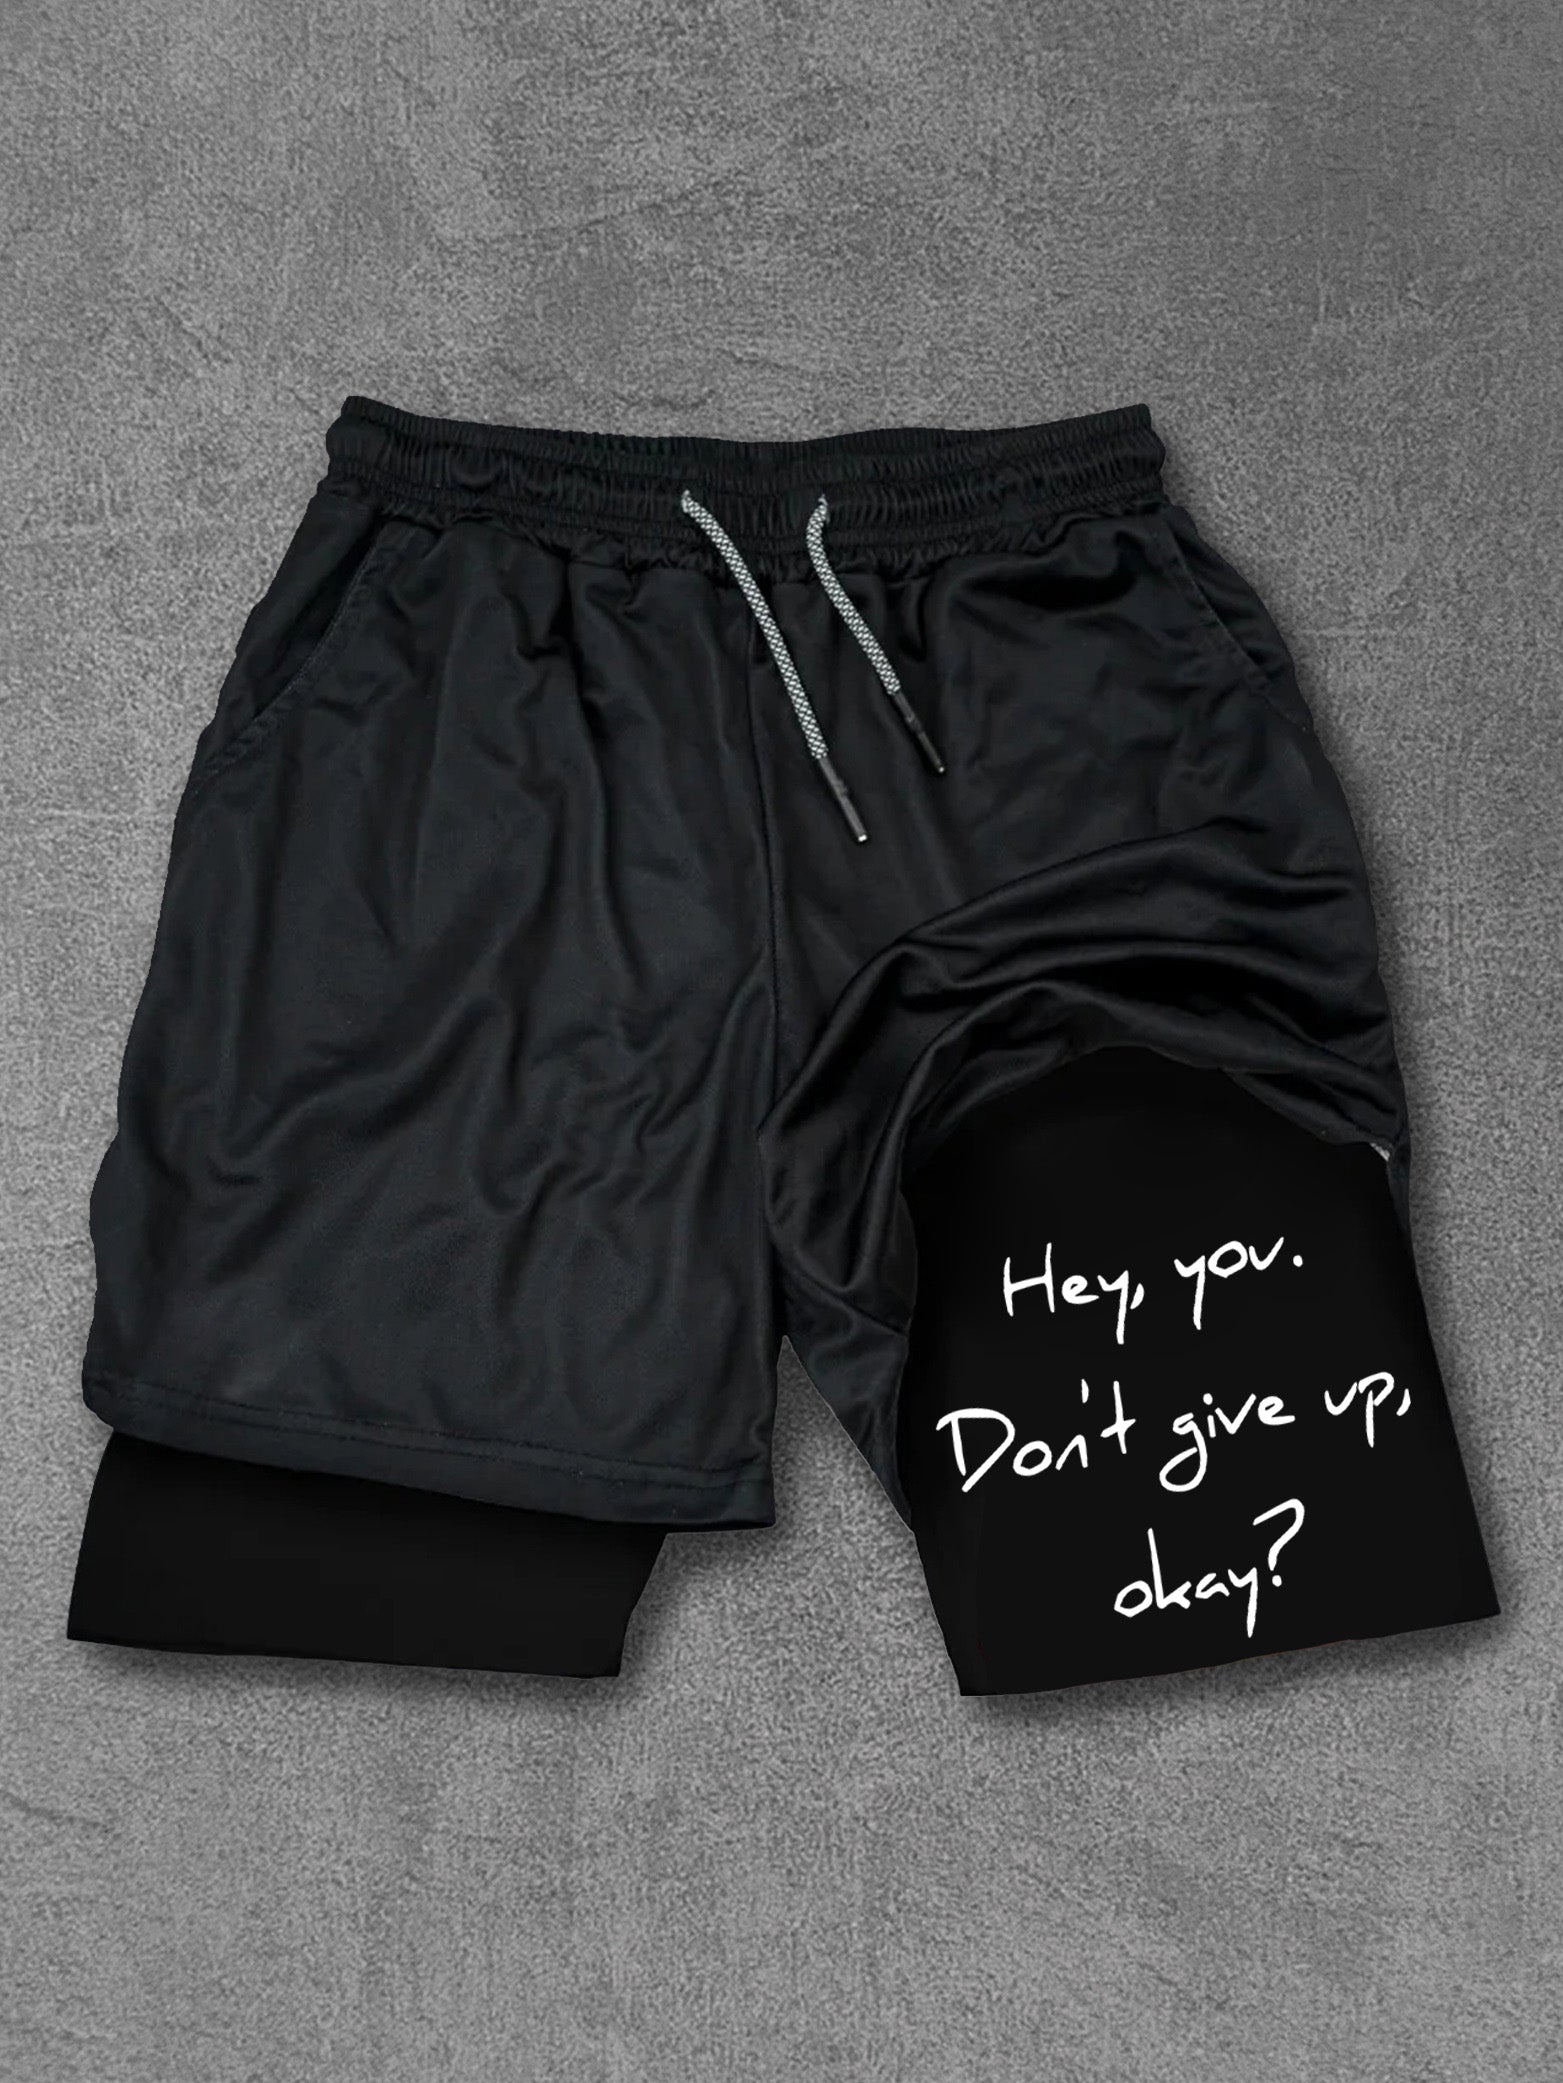 hey you don't give up okay Performance Training Shorts